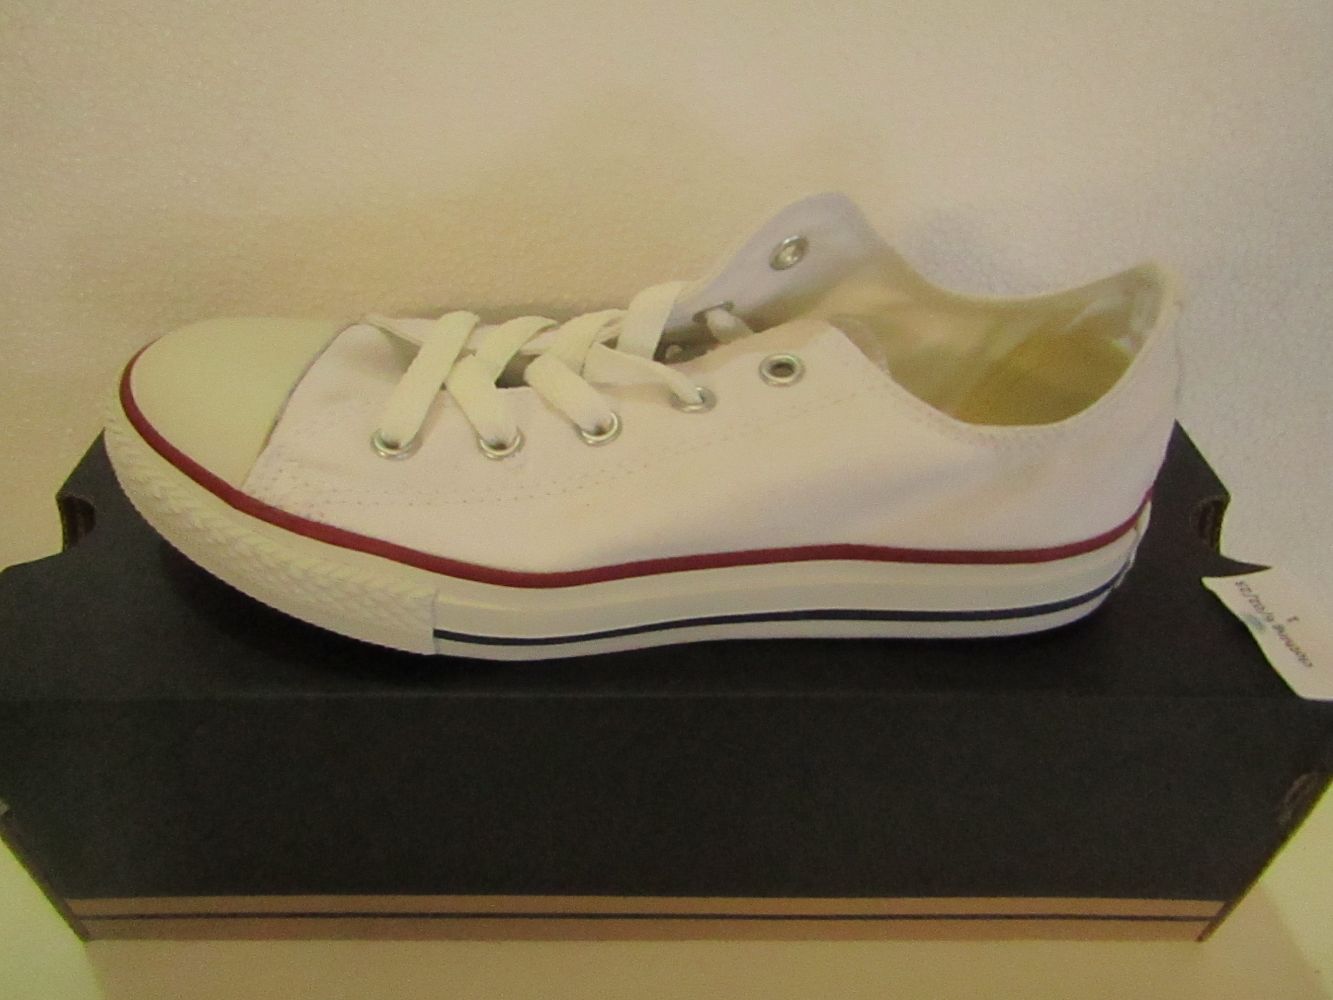 New starting prices on Converse trainers